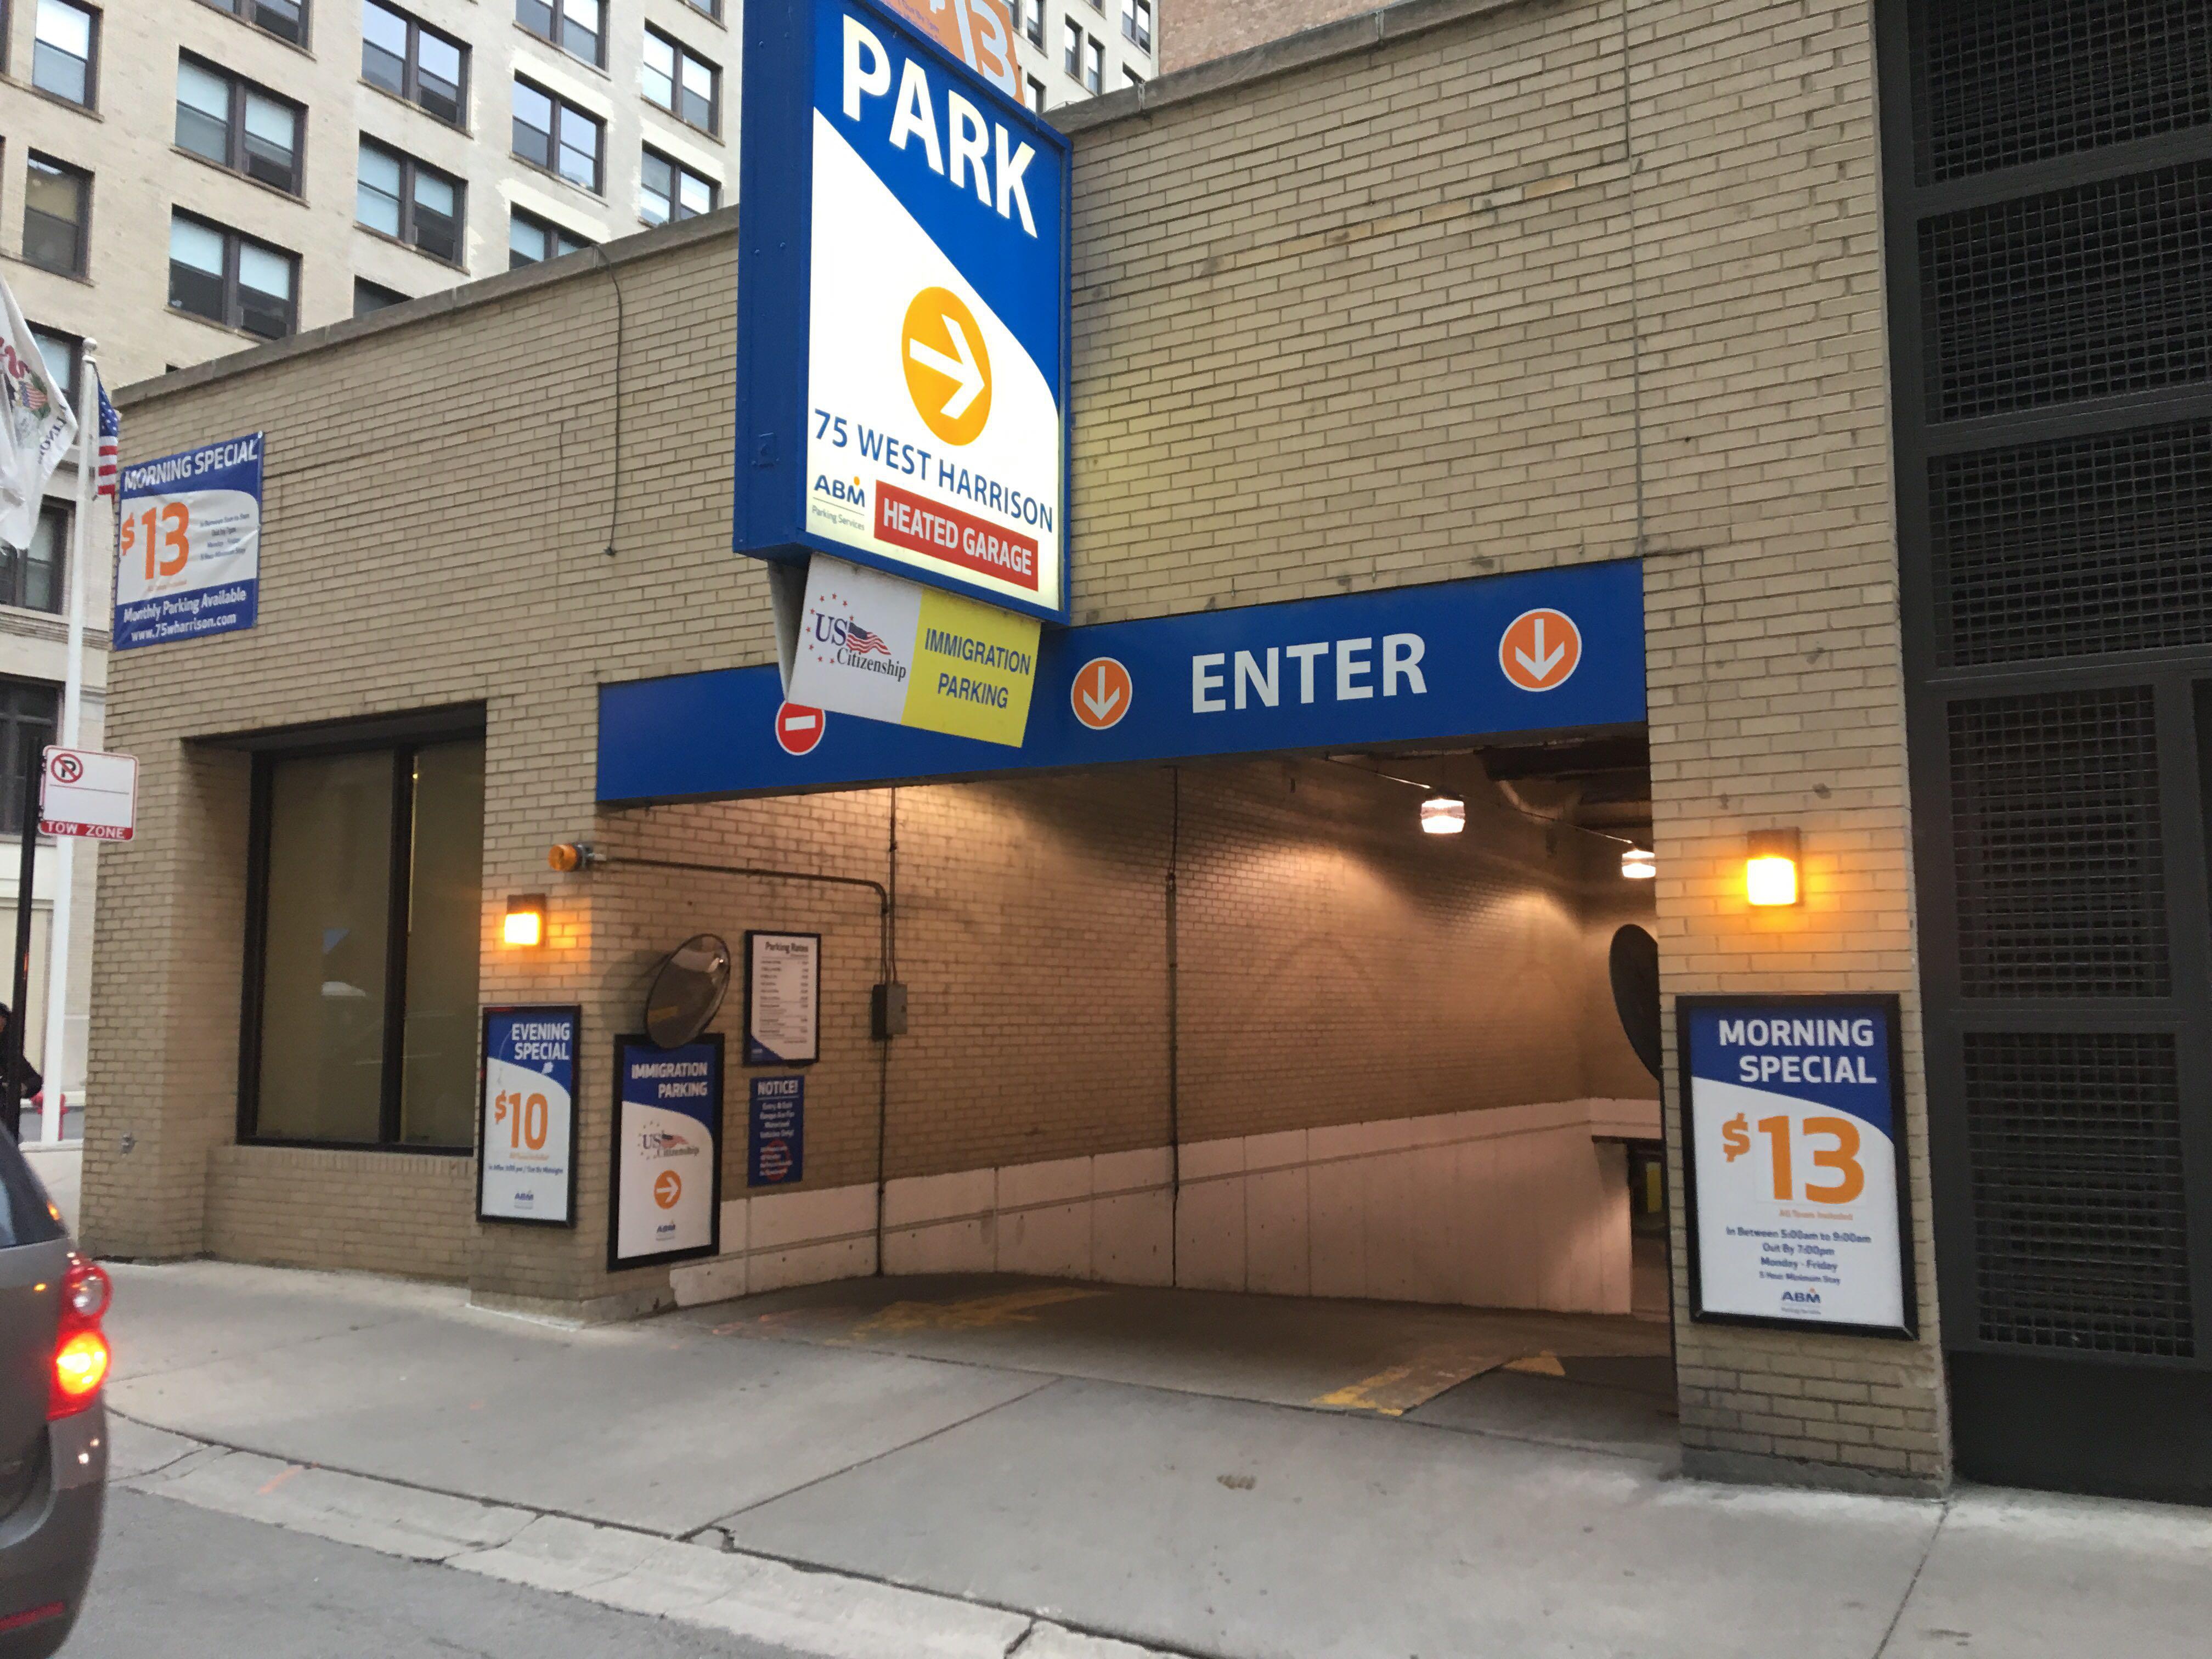 Book parking at 75 Saint Parking with AirGarage